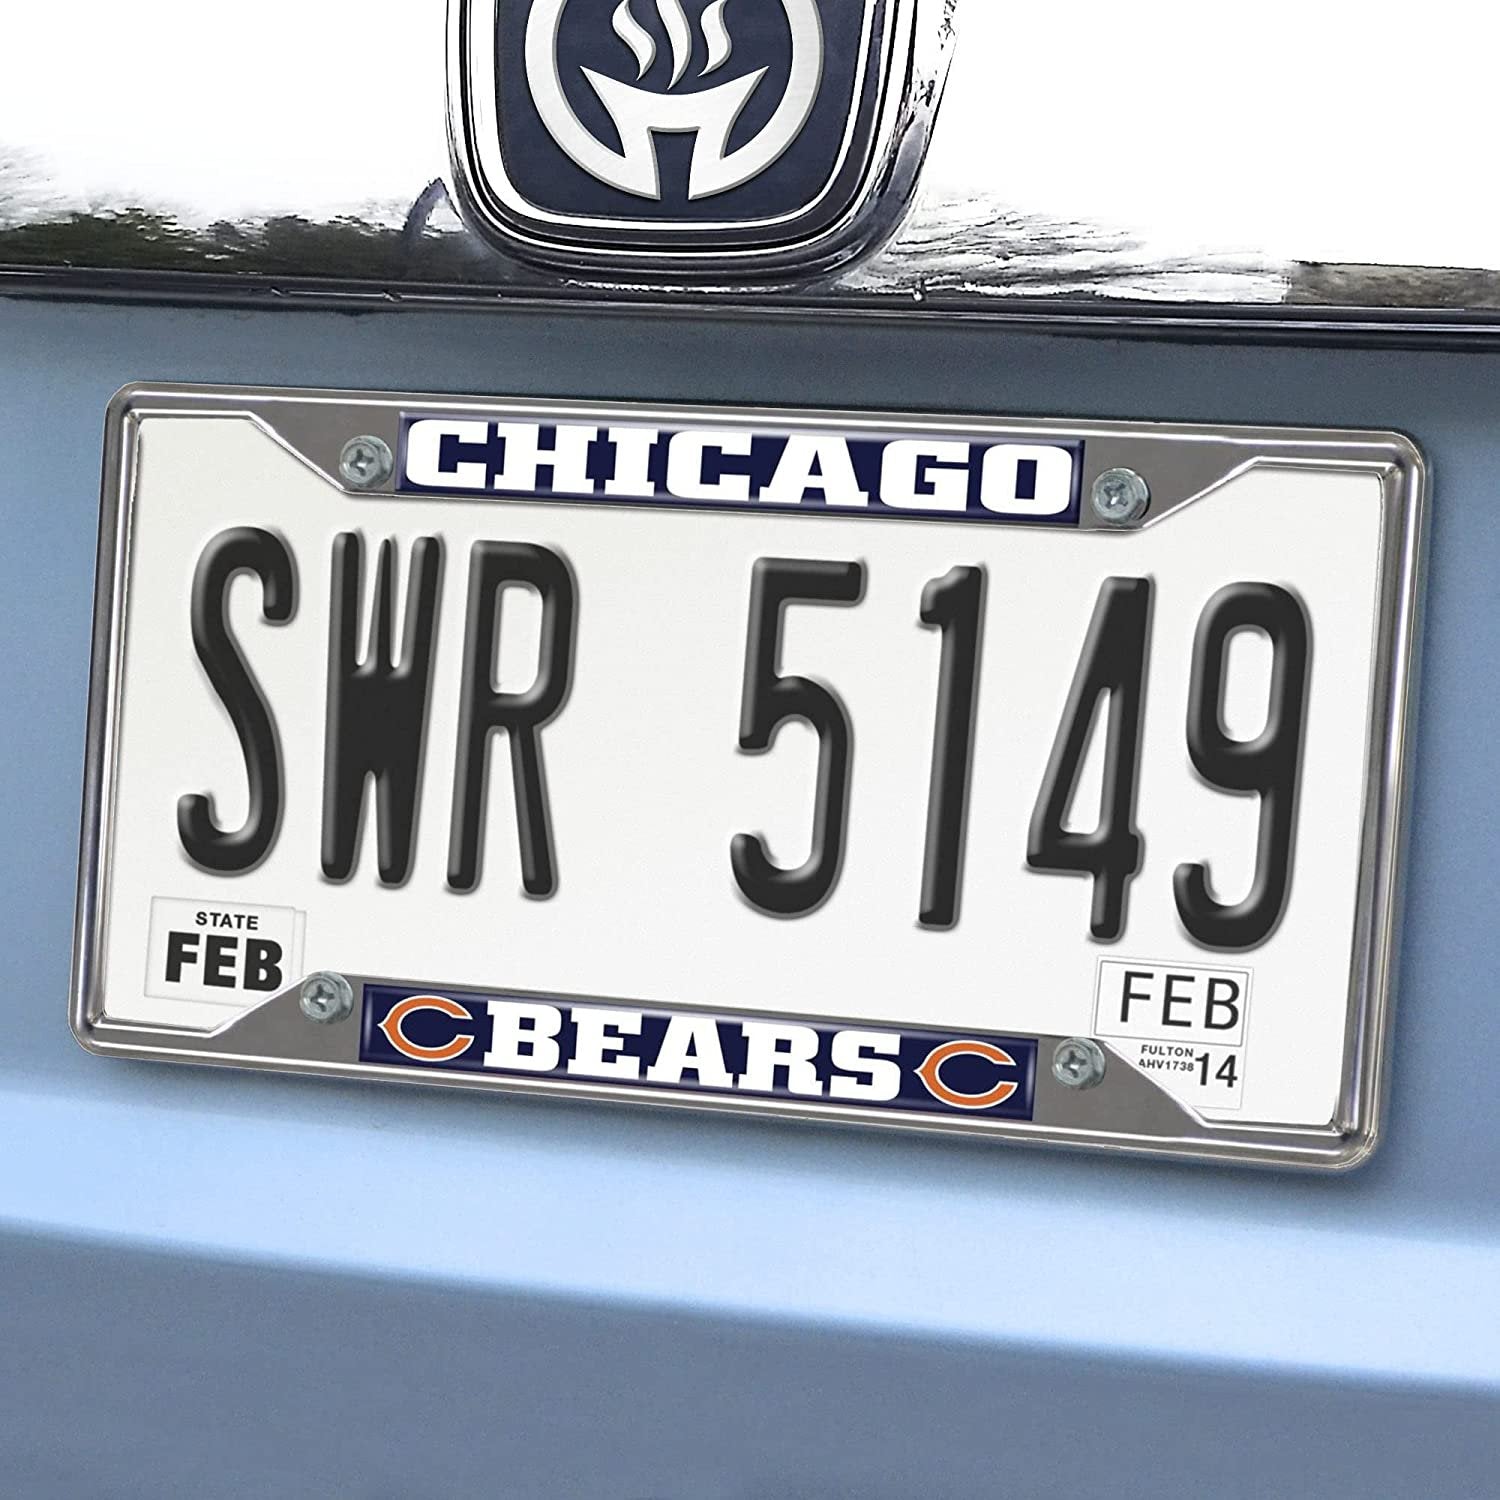 Chicago Bears Metal License Plate Frame Chrome Tag Cover 6x12 Inch